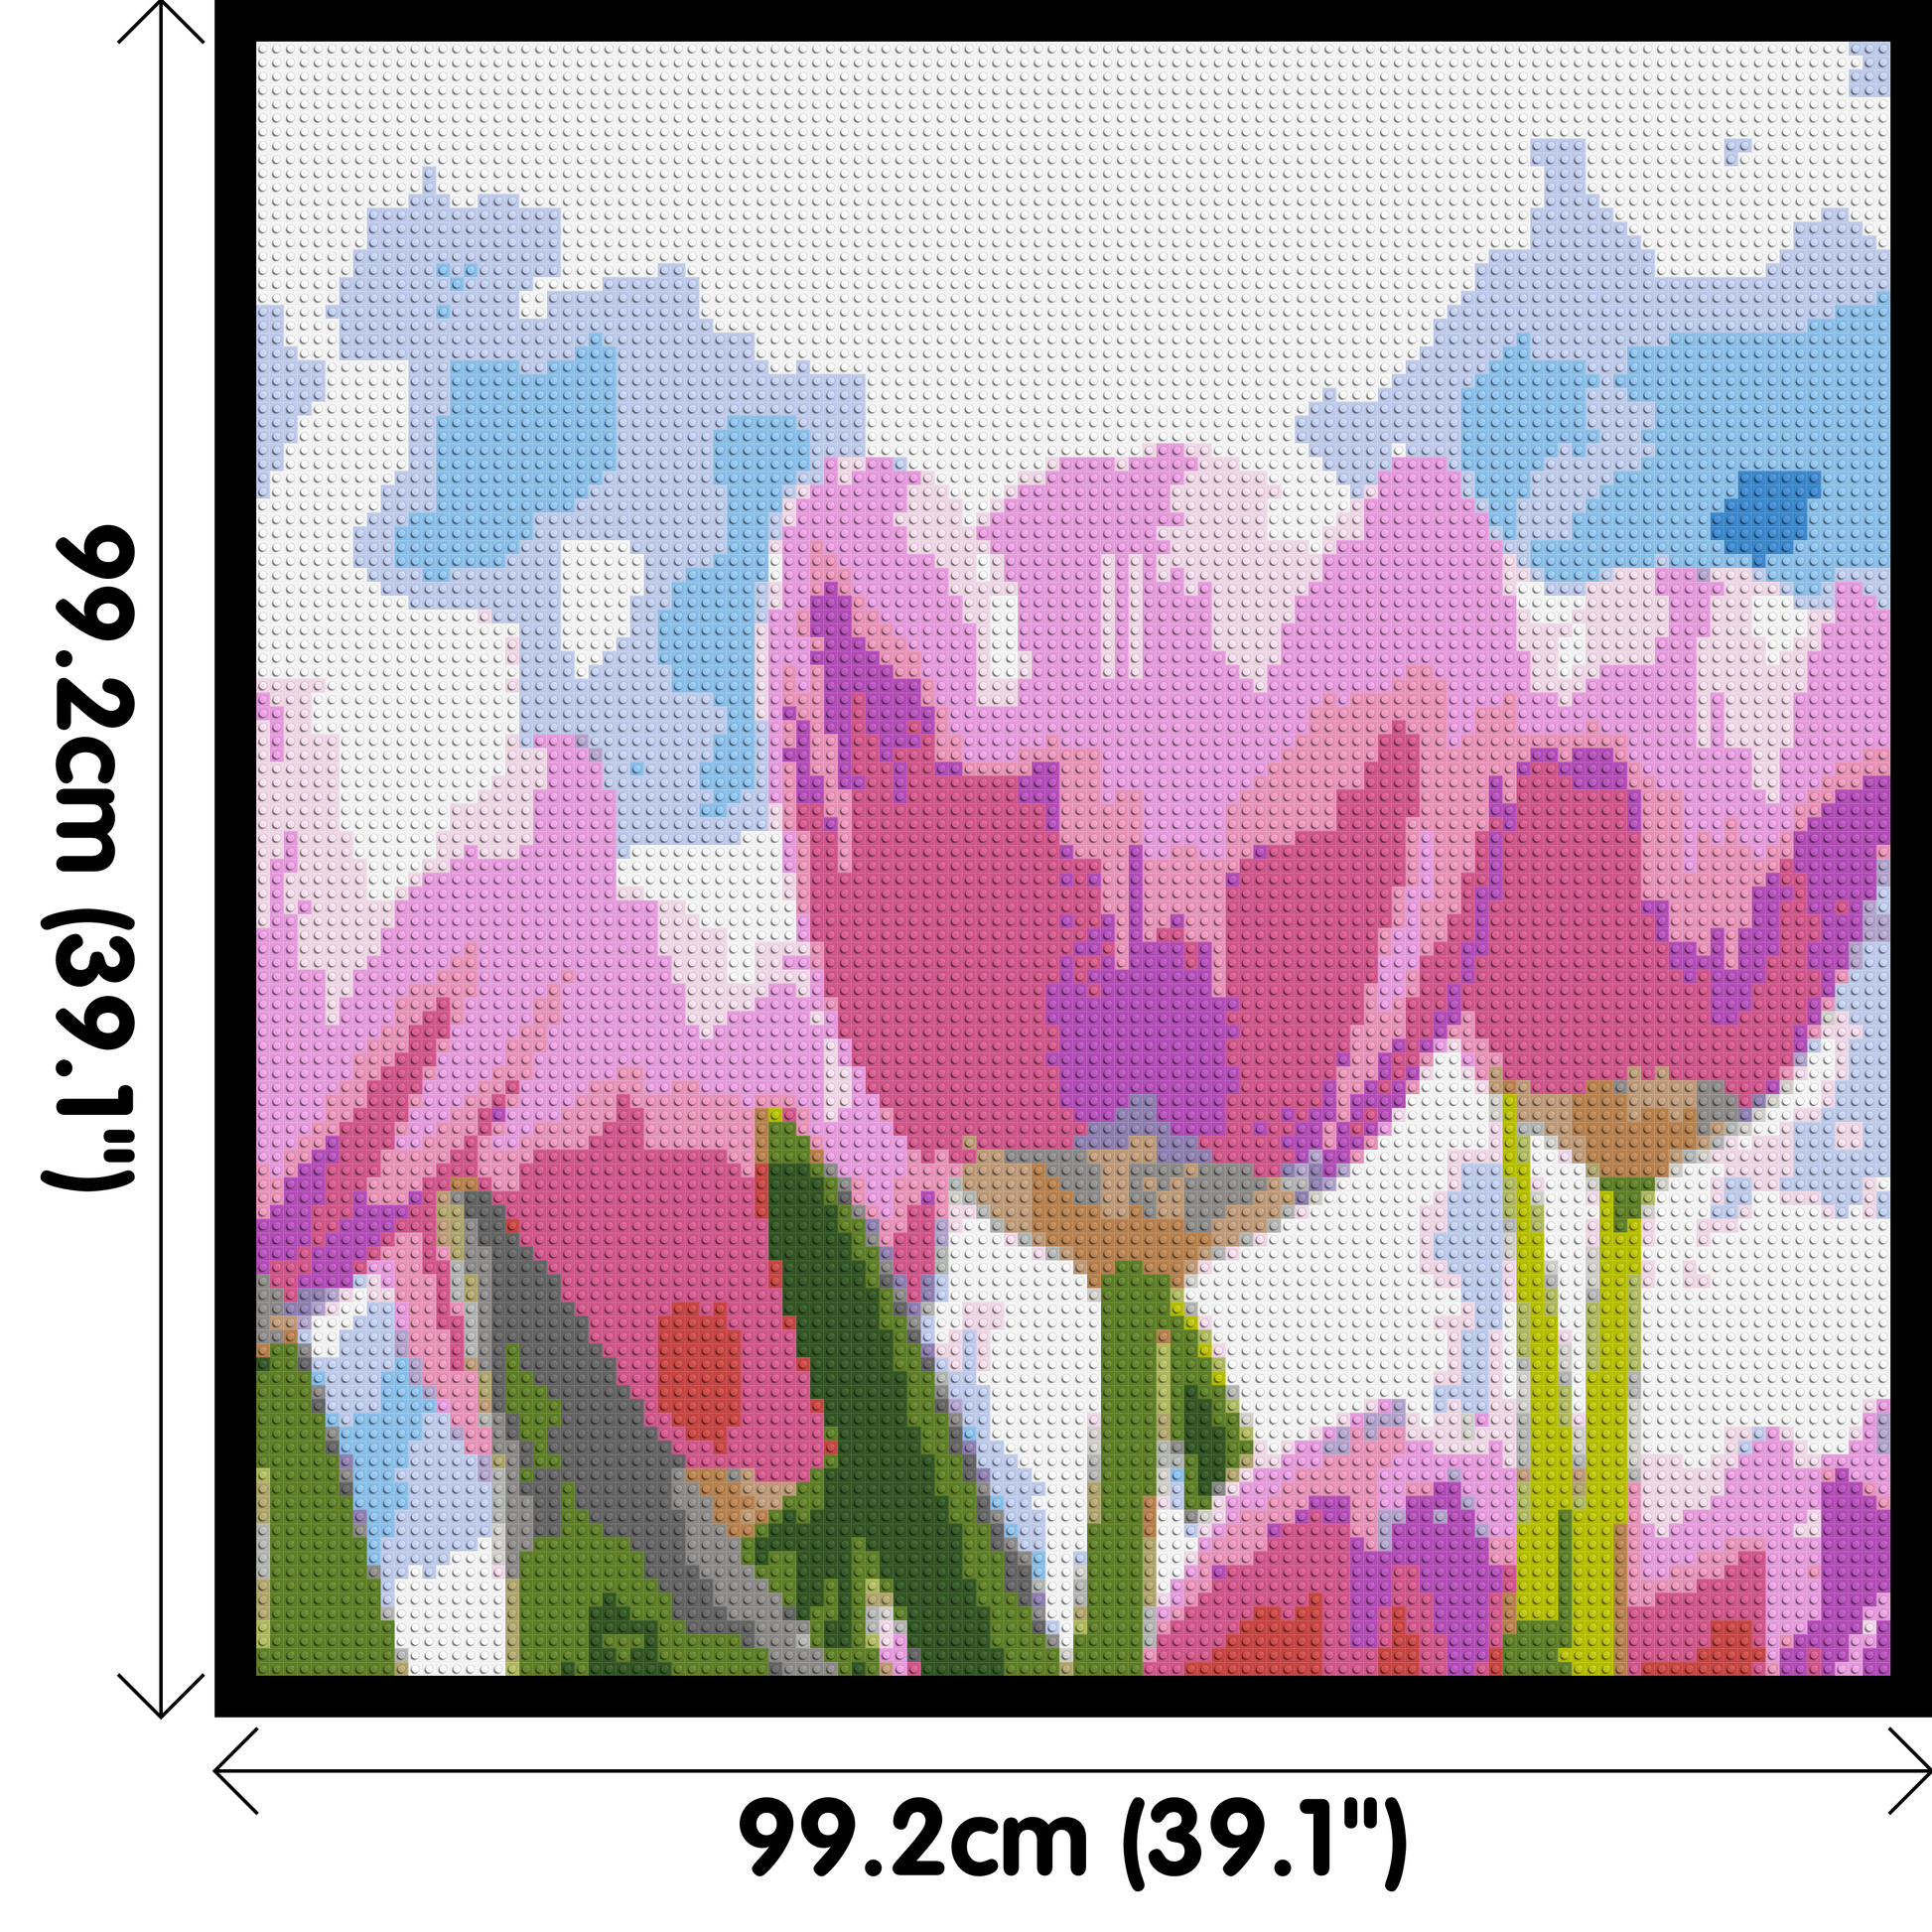 Pink Tulips - Brick Art Mosaic Kit 5x5 dimensions with frame